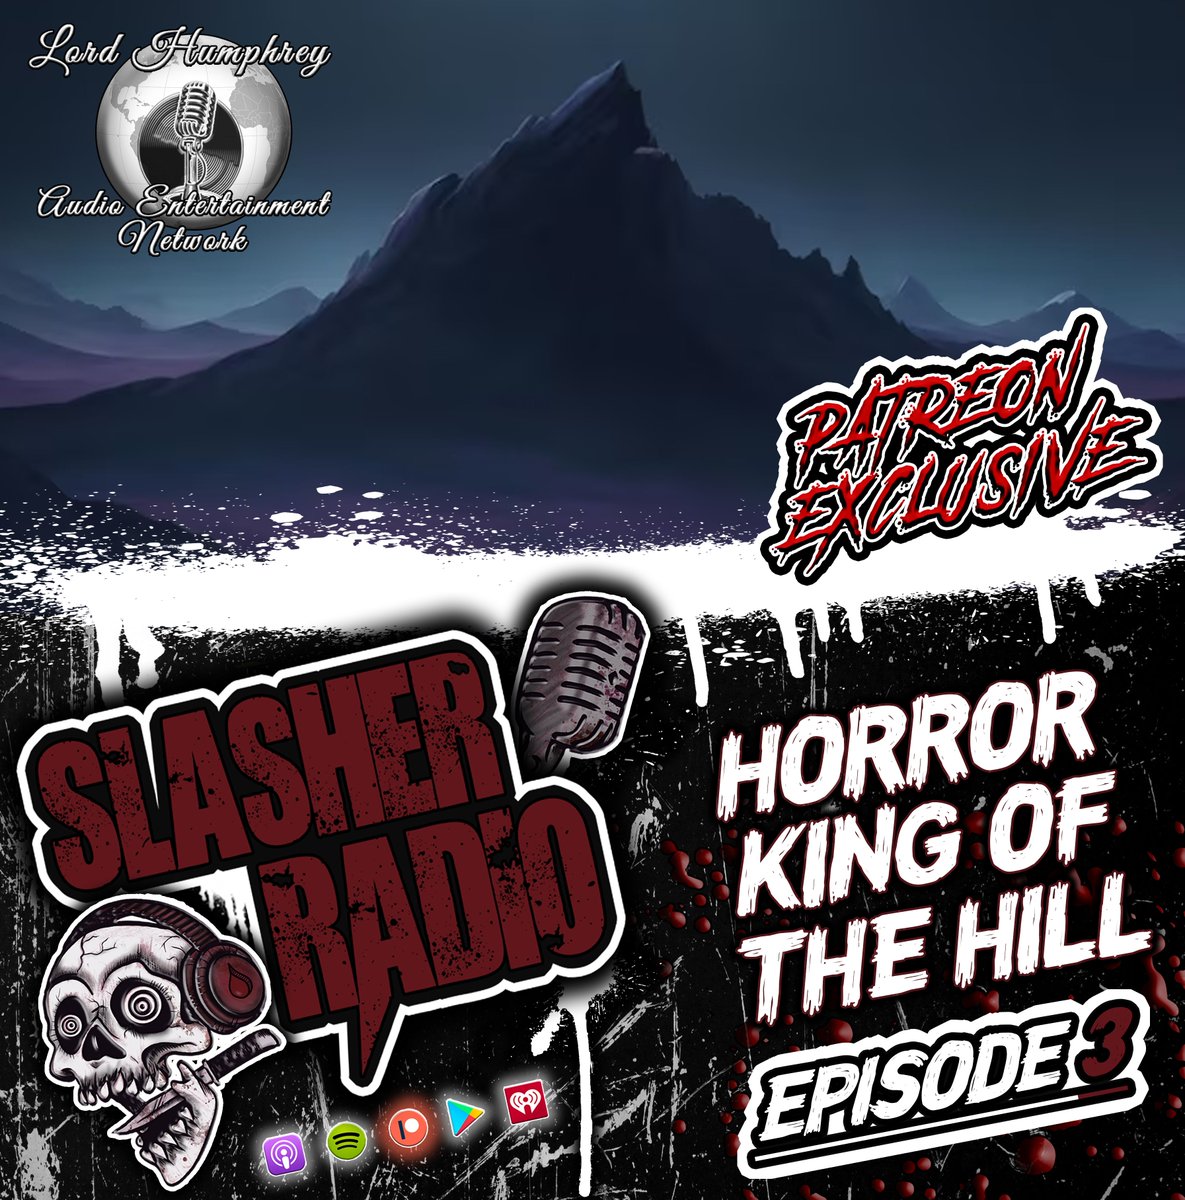 Another episode of #Horror King of the Hill is out NOW exclusively @ Patreon.com/SlasherRadio #SupportIndieHorror #SlasherRadio🔪